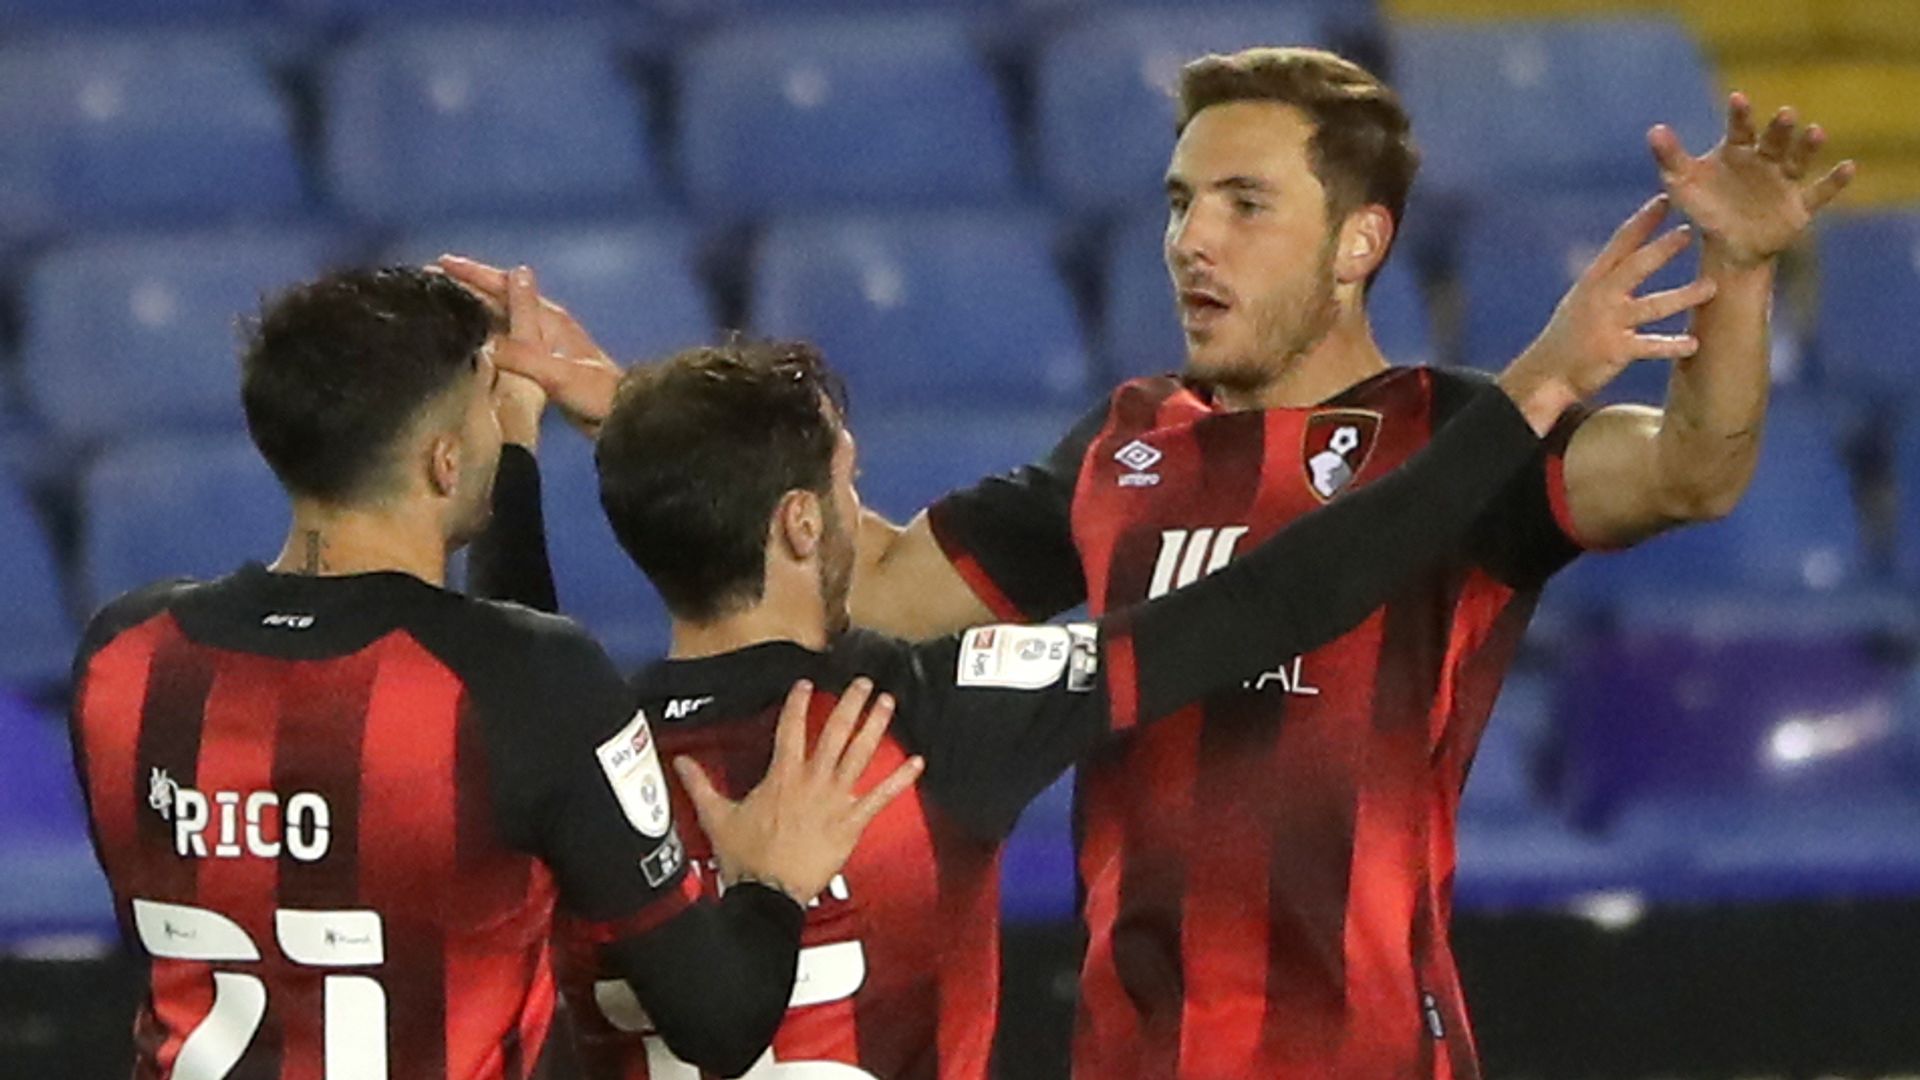 Bournemouth beat 10-man Coventry to move top